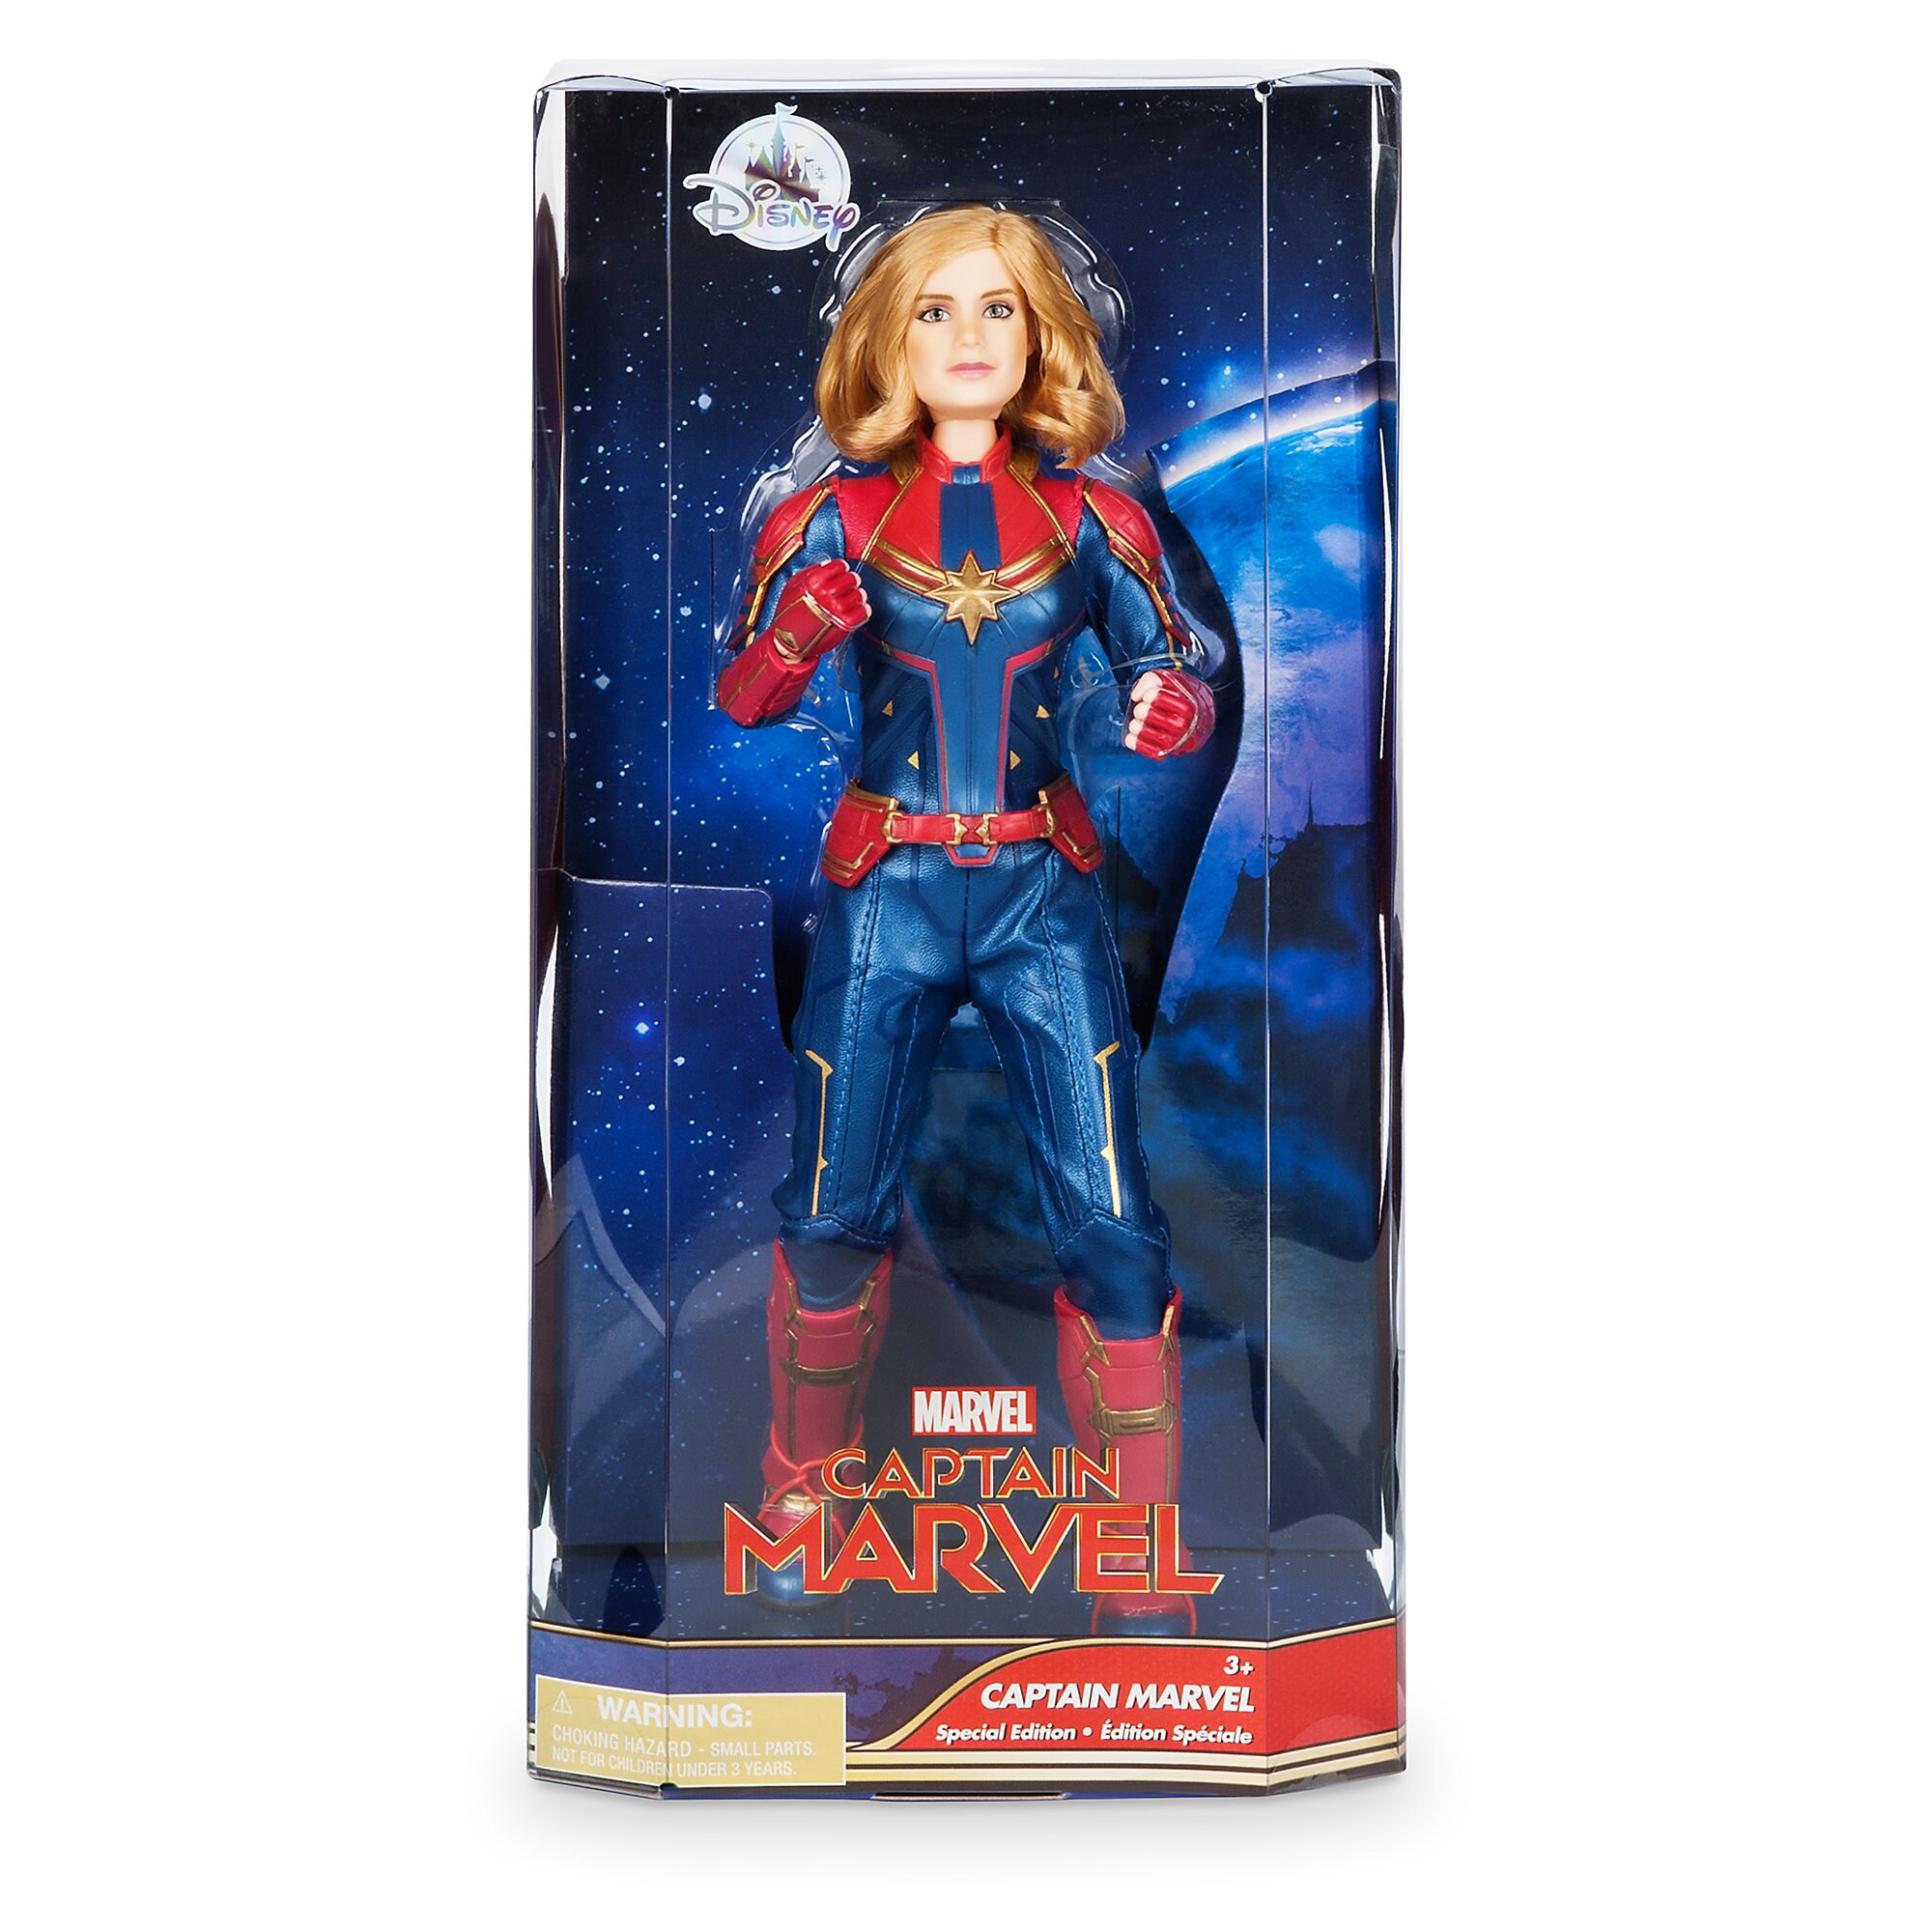 Marvel's Captain Marvel Doll Special Edition 10'' is now